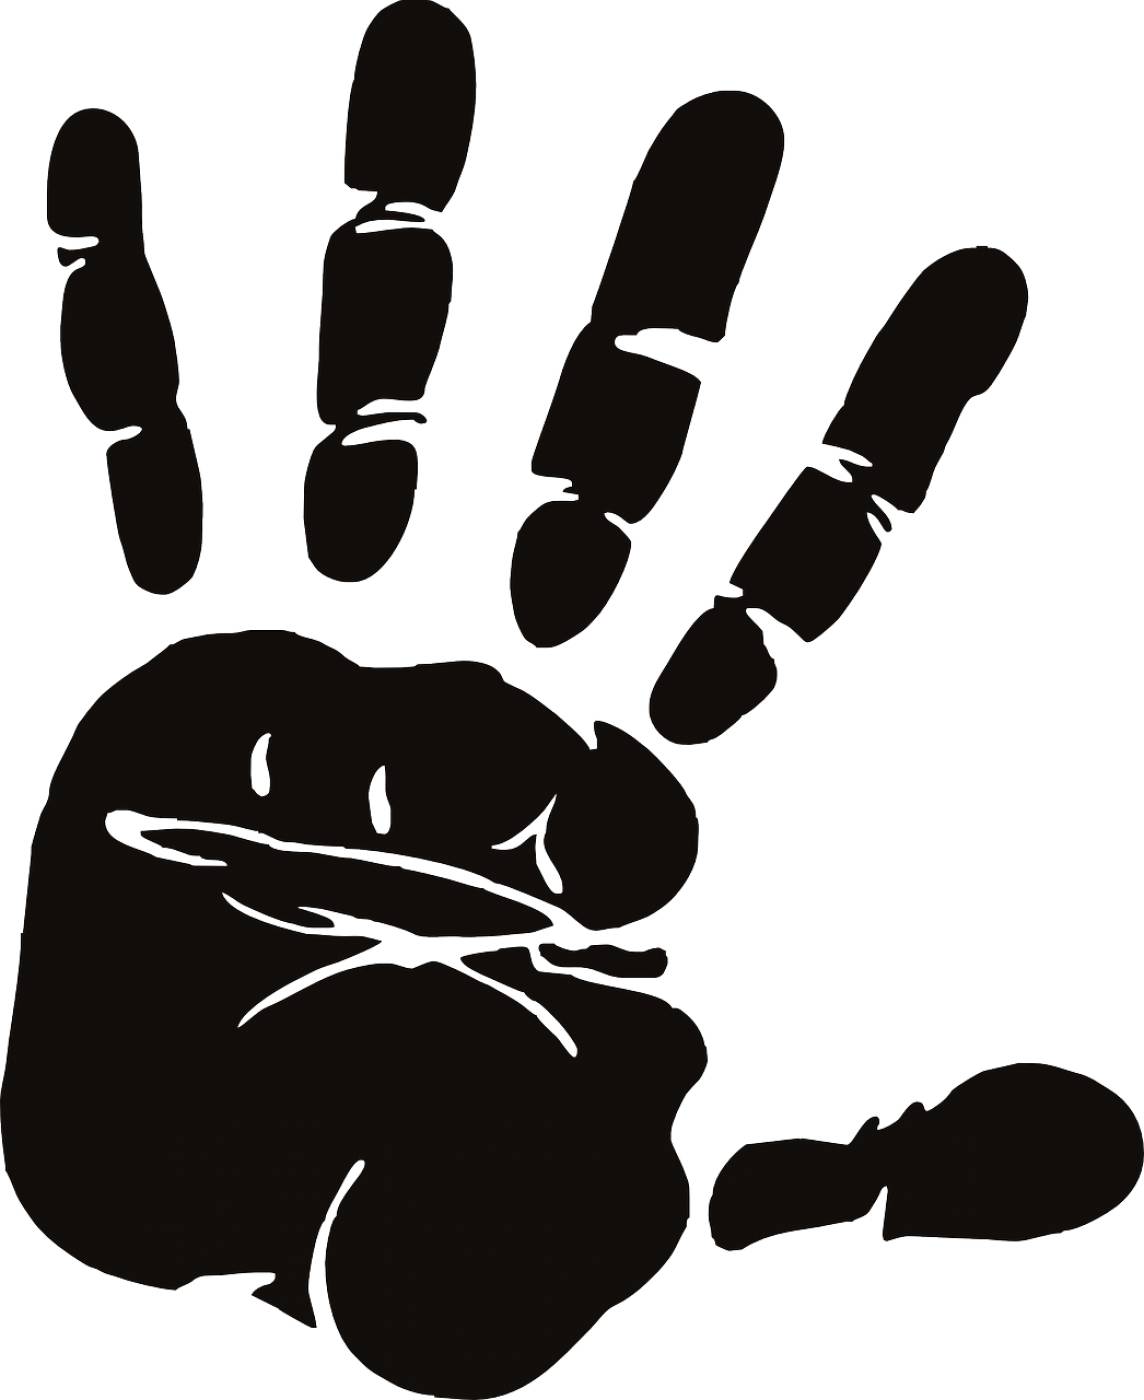 hand palm fingers spread  svg vector